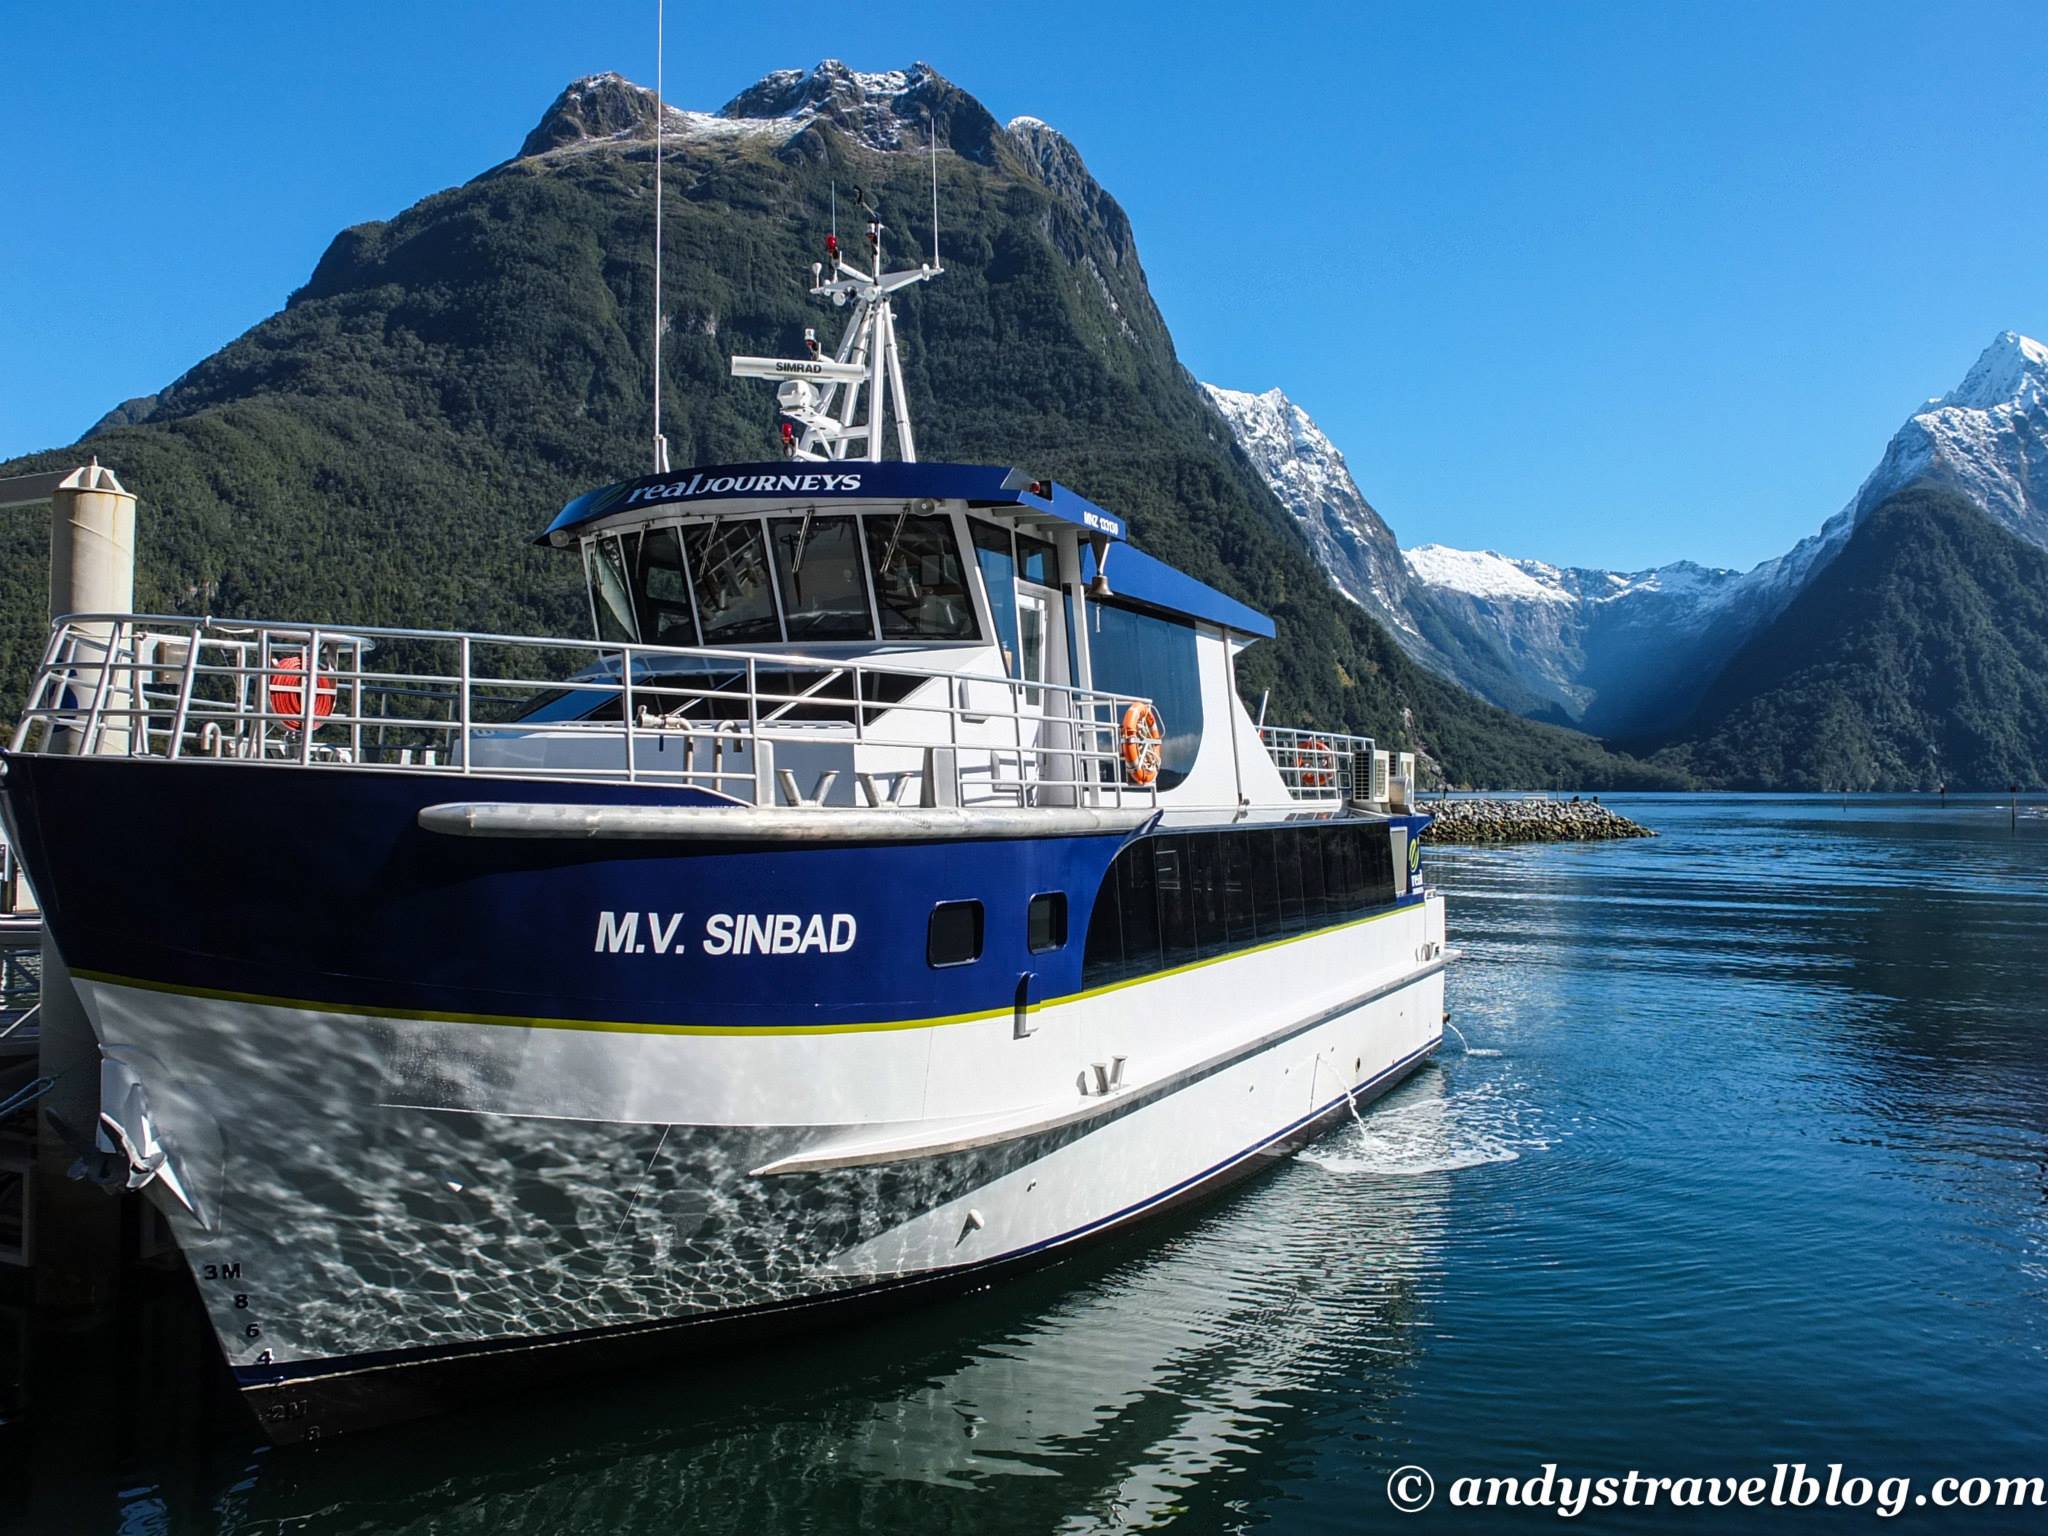 Milford Sound: Making Boats Look Pretty Since I Dunno I Kind Of Lost Motivation For This Joke